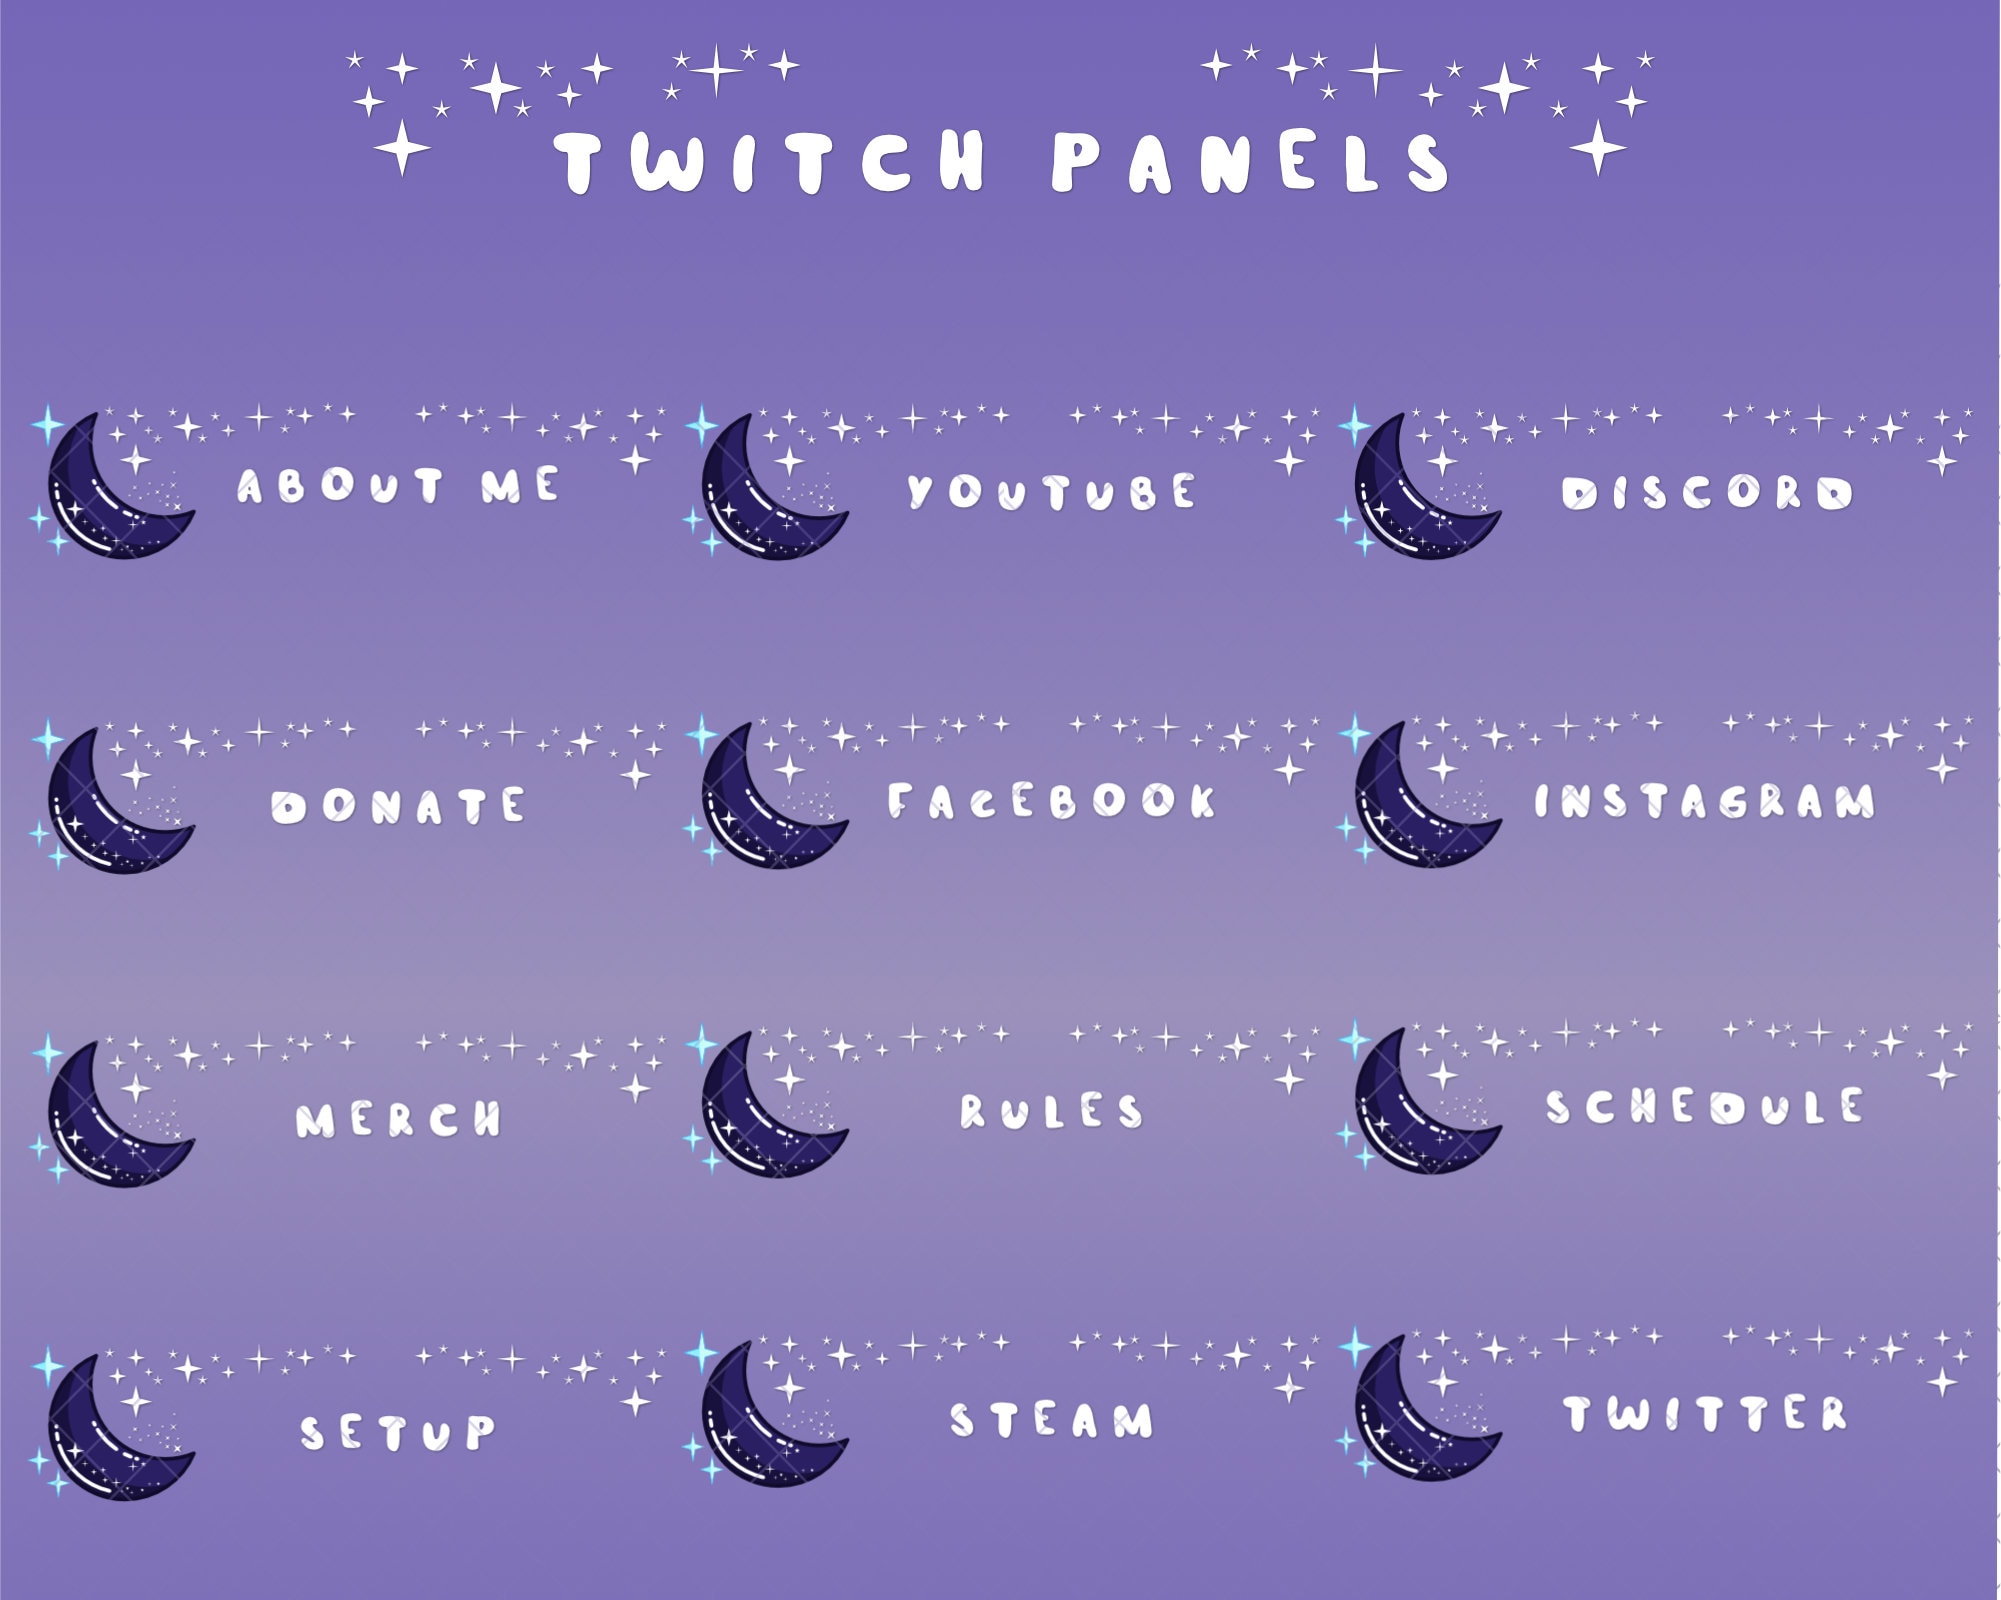 panels for twitch